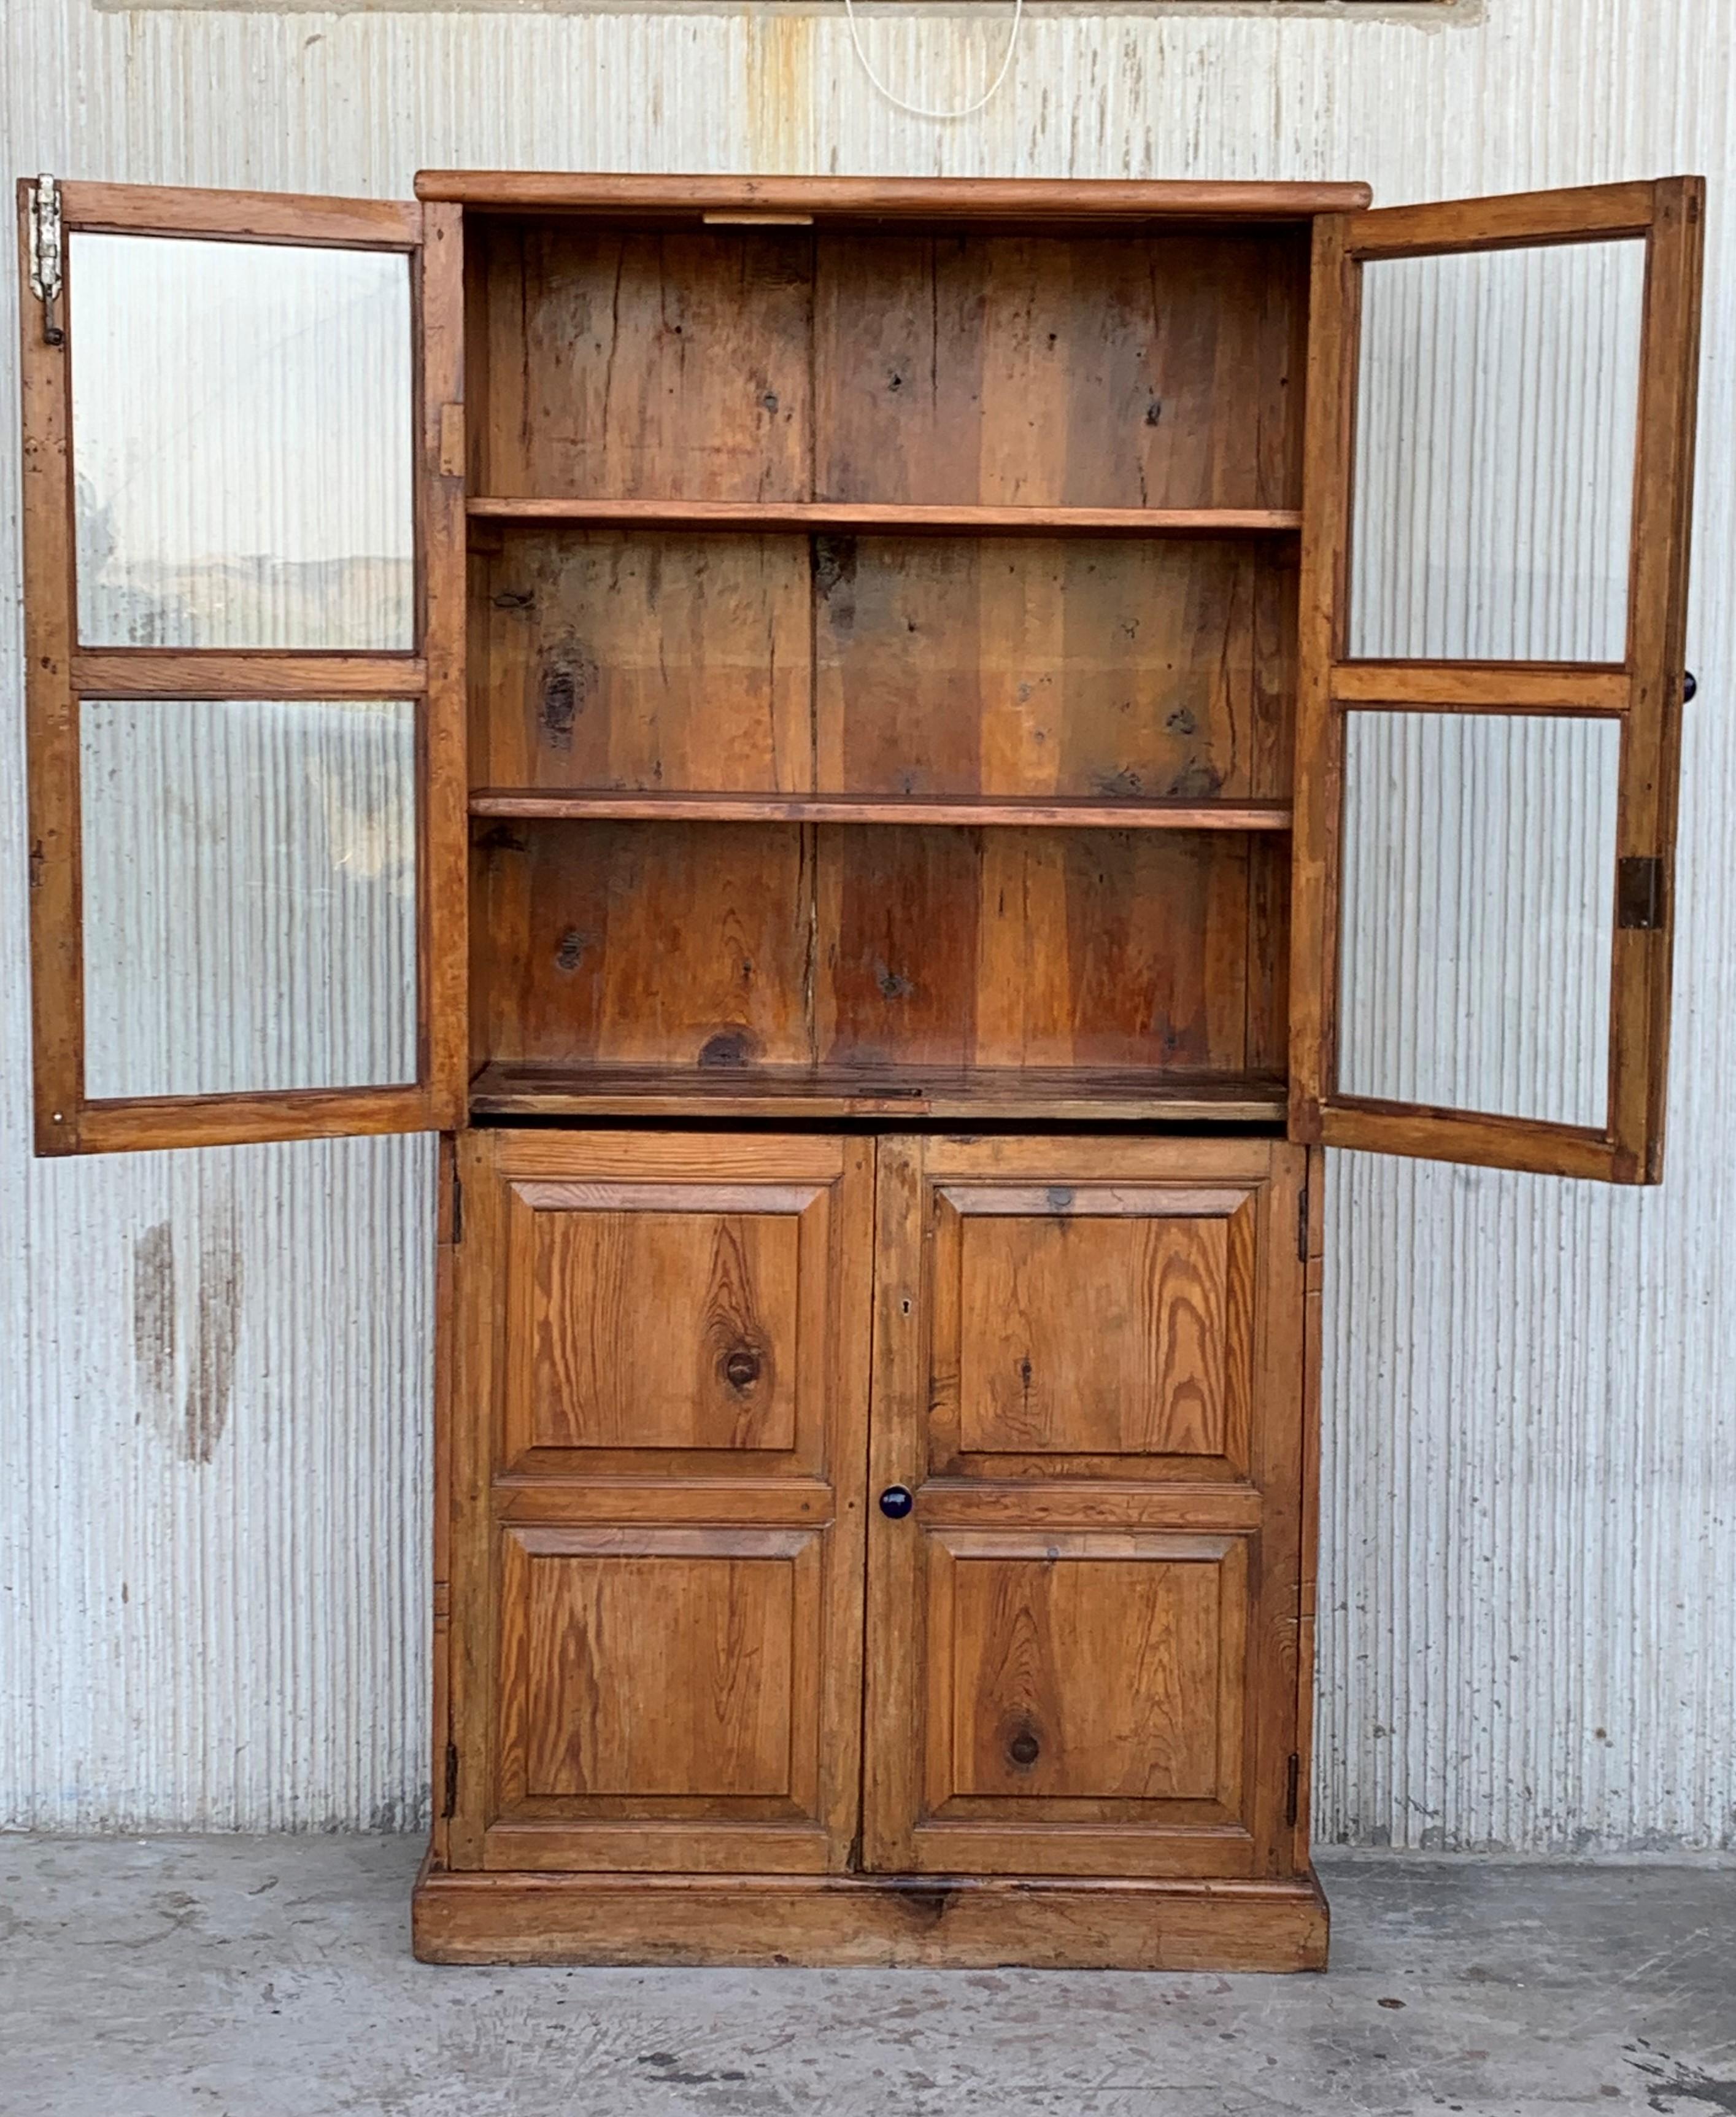 Spanish 19th Century Large Cupboard or Bookcase with Glass Vitrine, Pine, Spain Restored